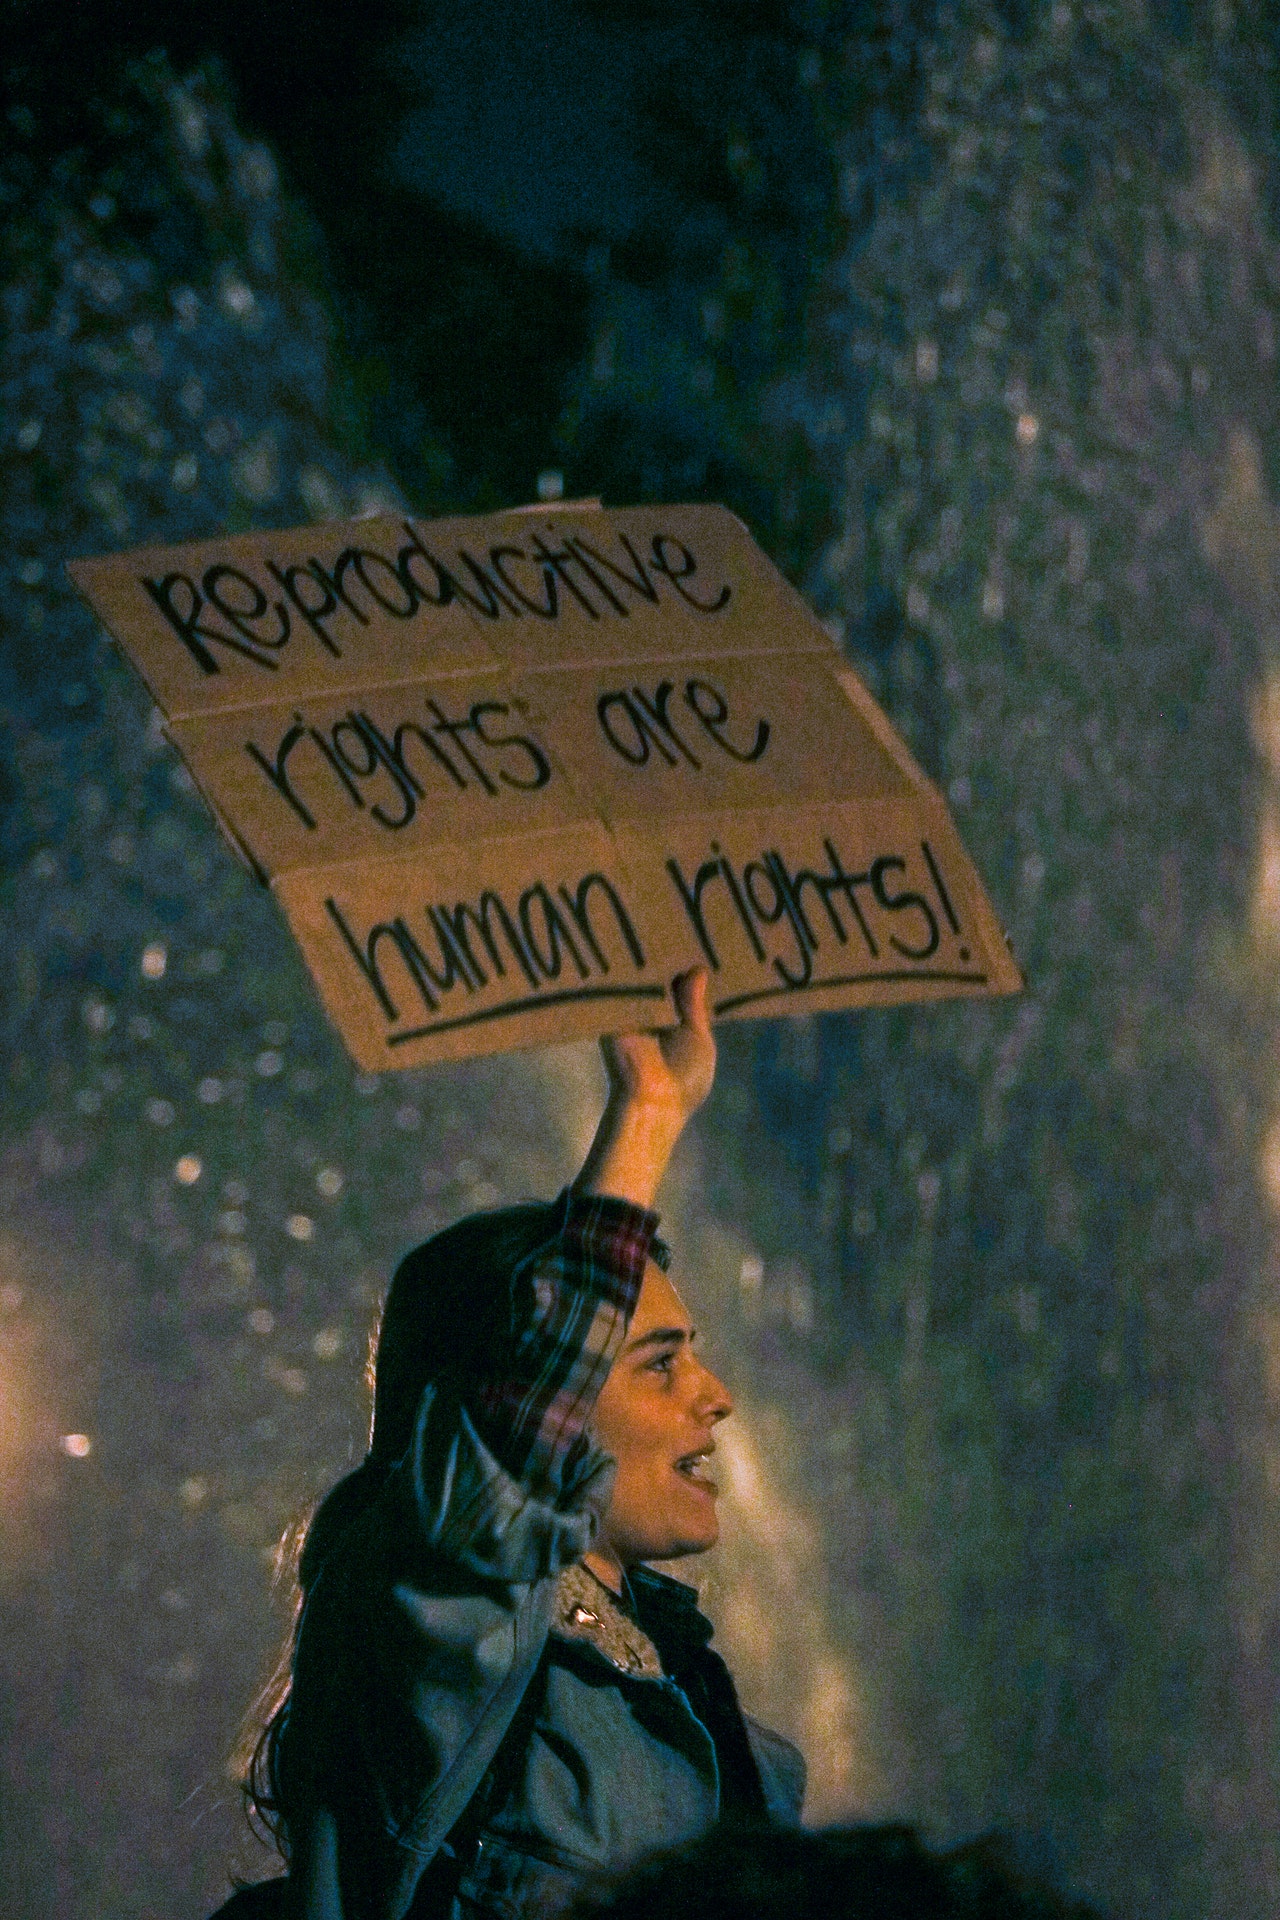 Person at a nighttime pro abortion rights protest holding up a sign that says "Reproductive Rights are Human Rights"